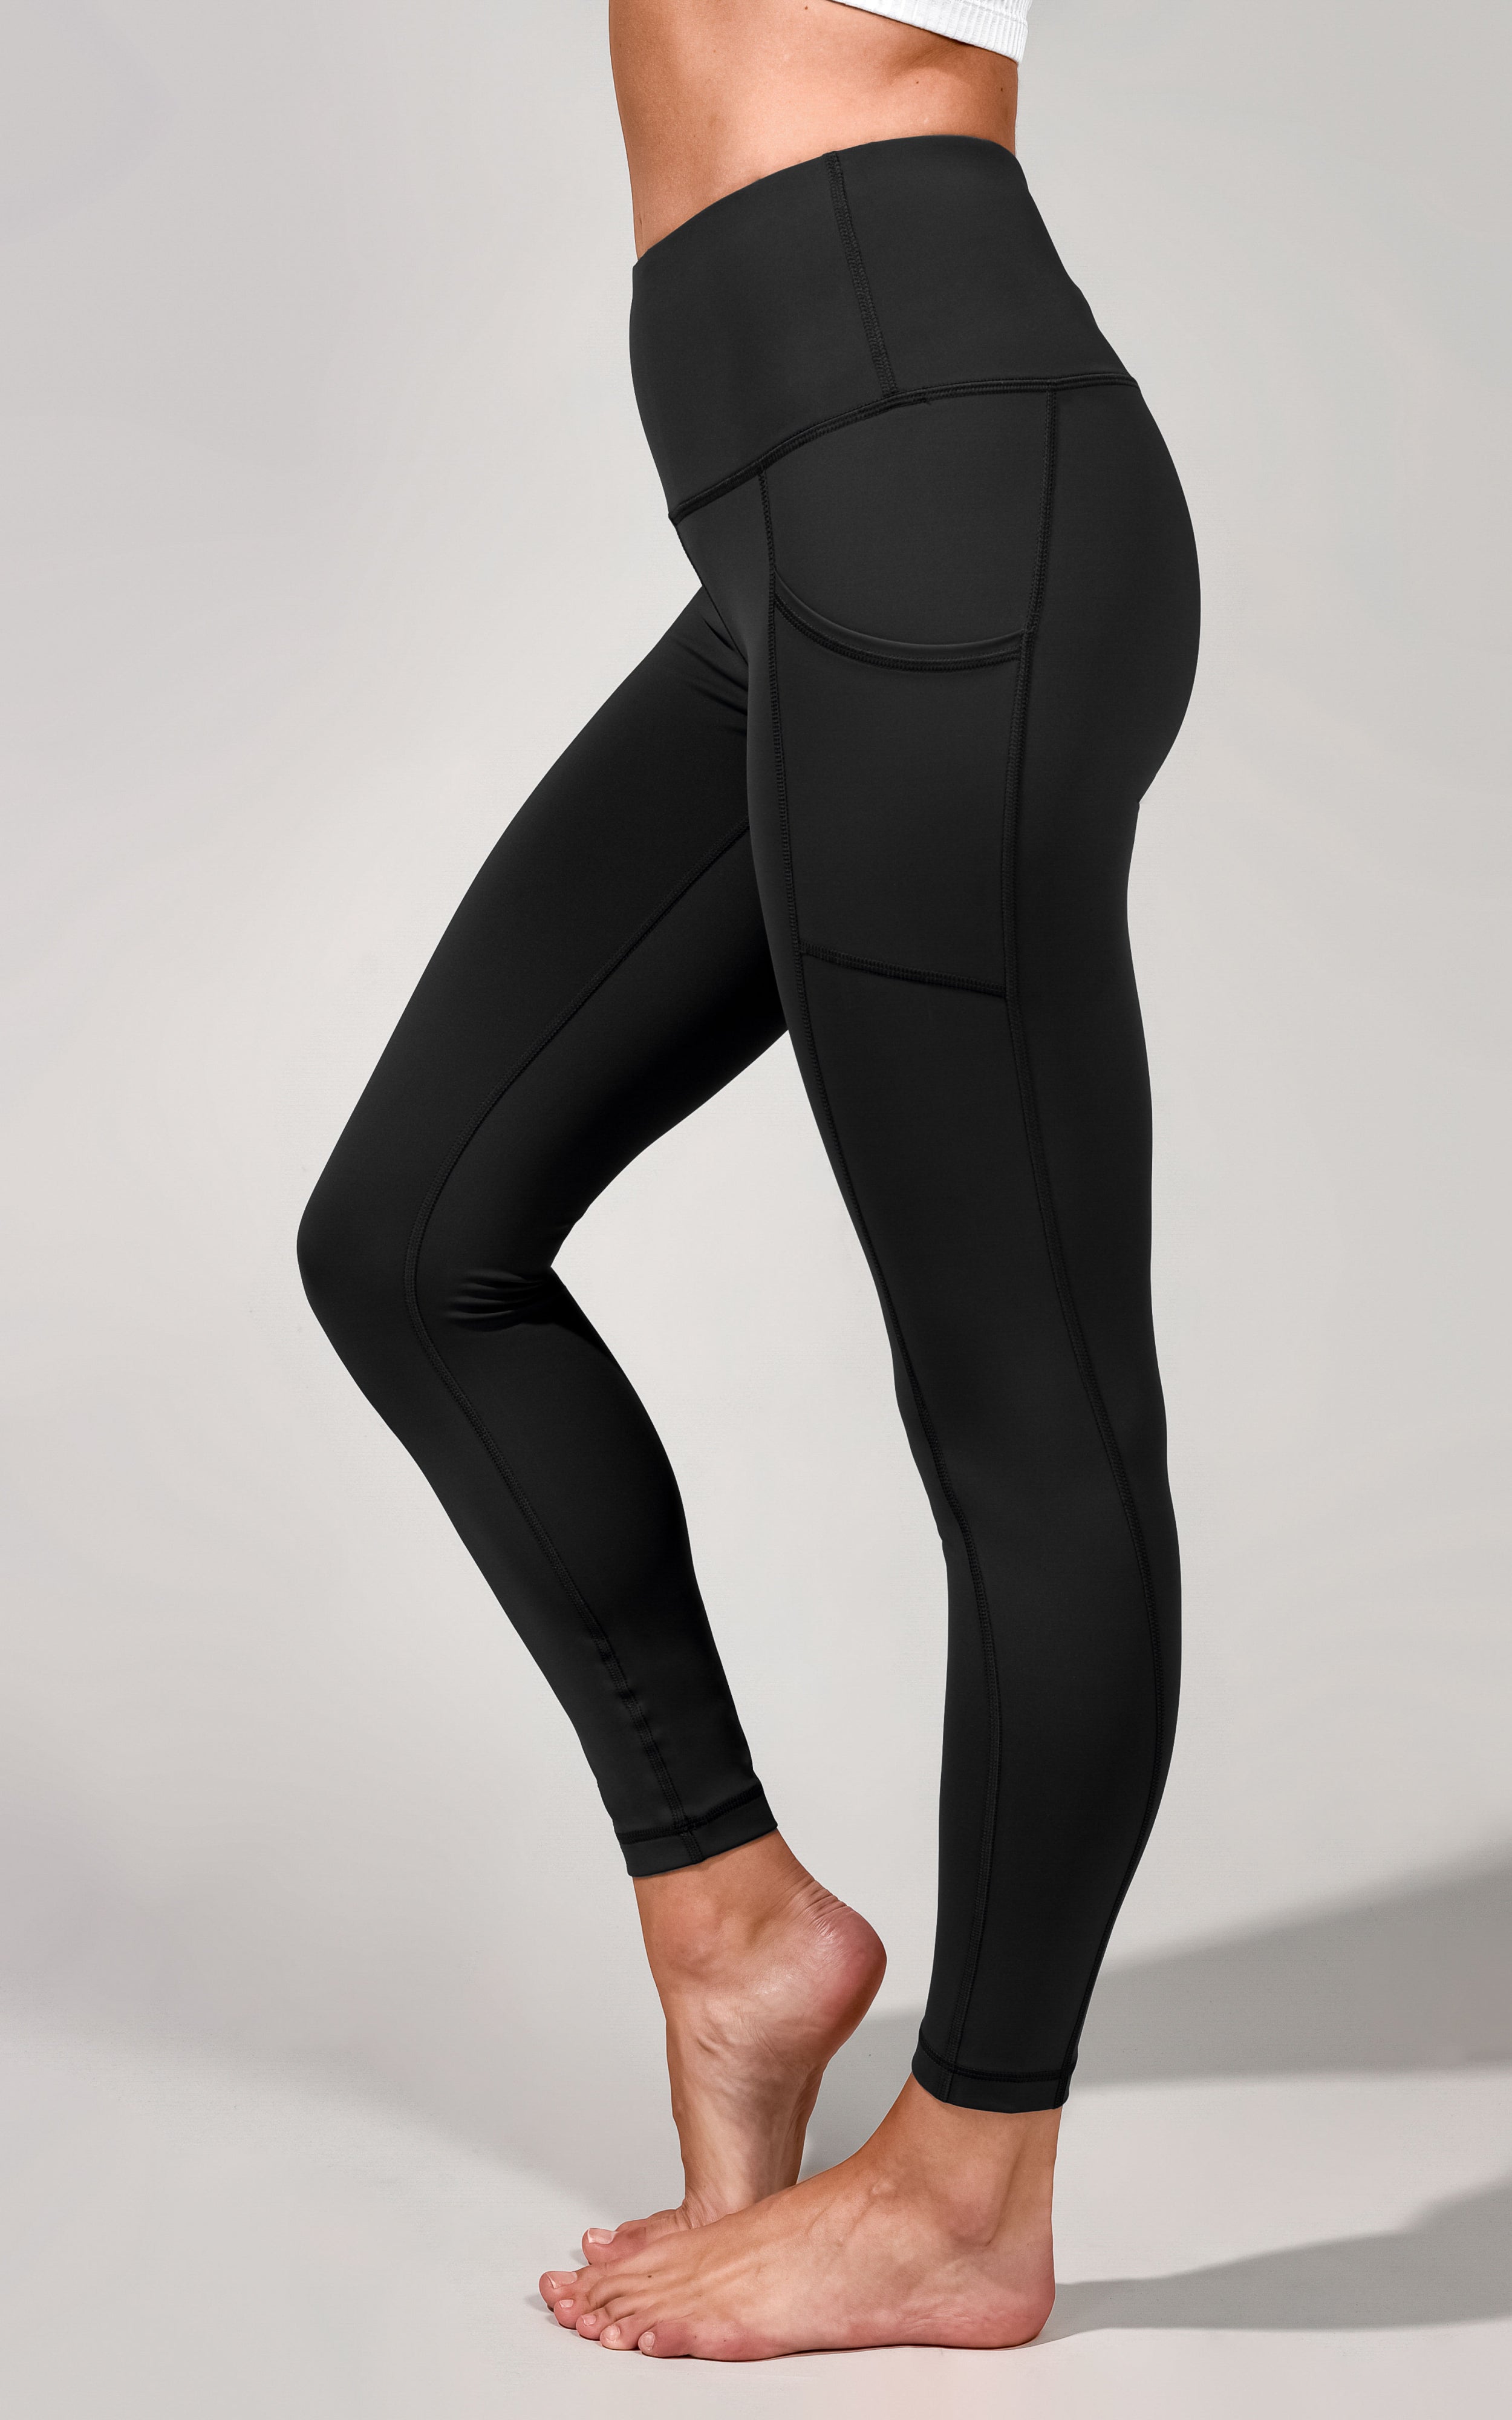  Yogalicious High Waist Squat Proof Lux Ankle Leggings For  Women